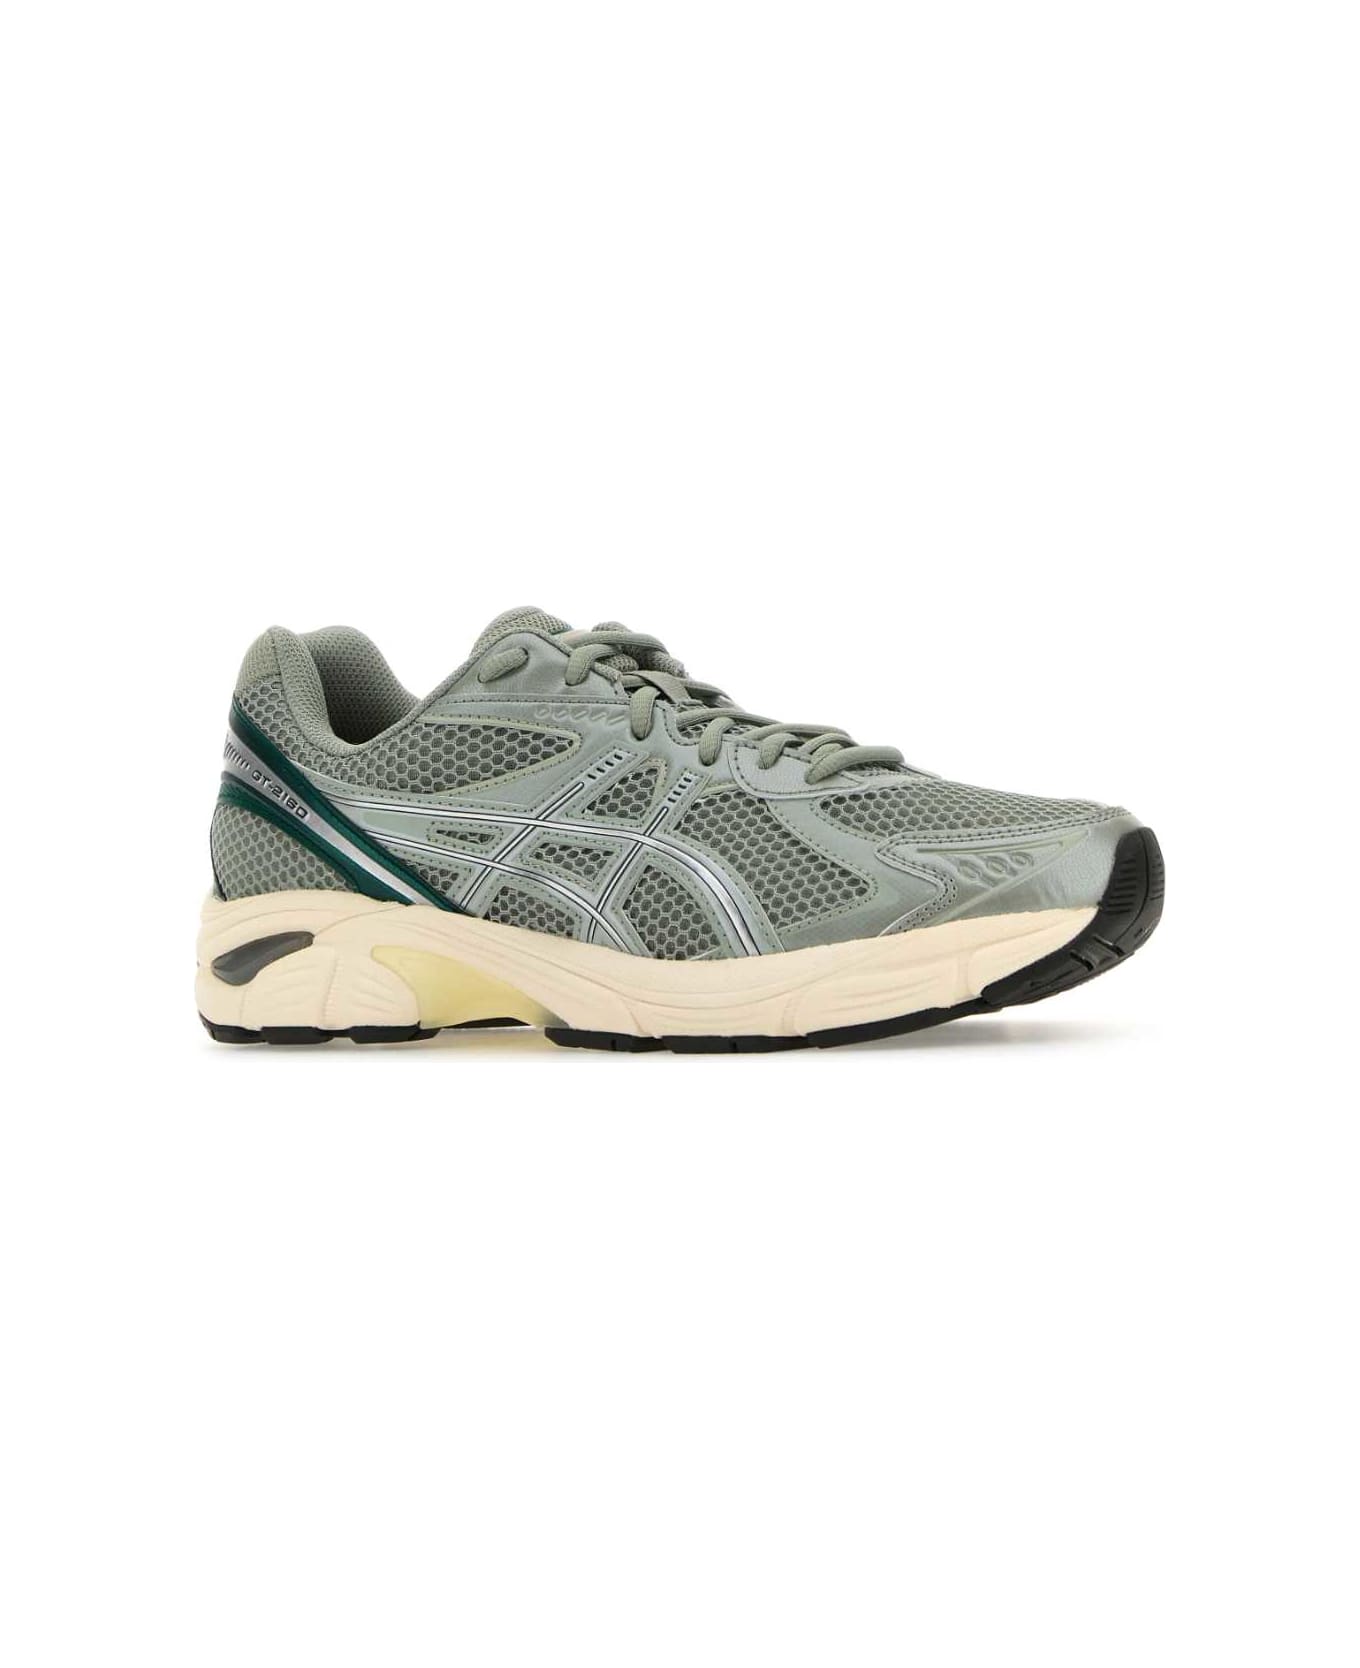 Asics Multicolor Mesh And Synthetic Leather Gt-2160 Sneakers - SEALGREYJEWELGREEN スニーカー